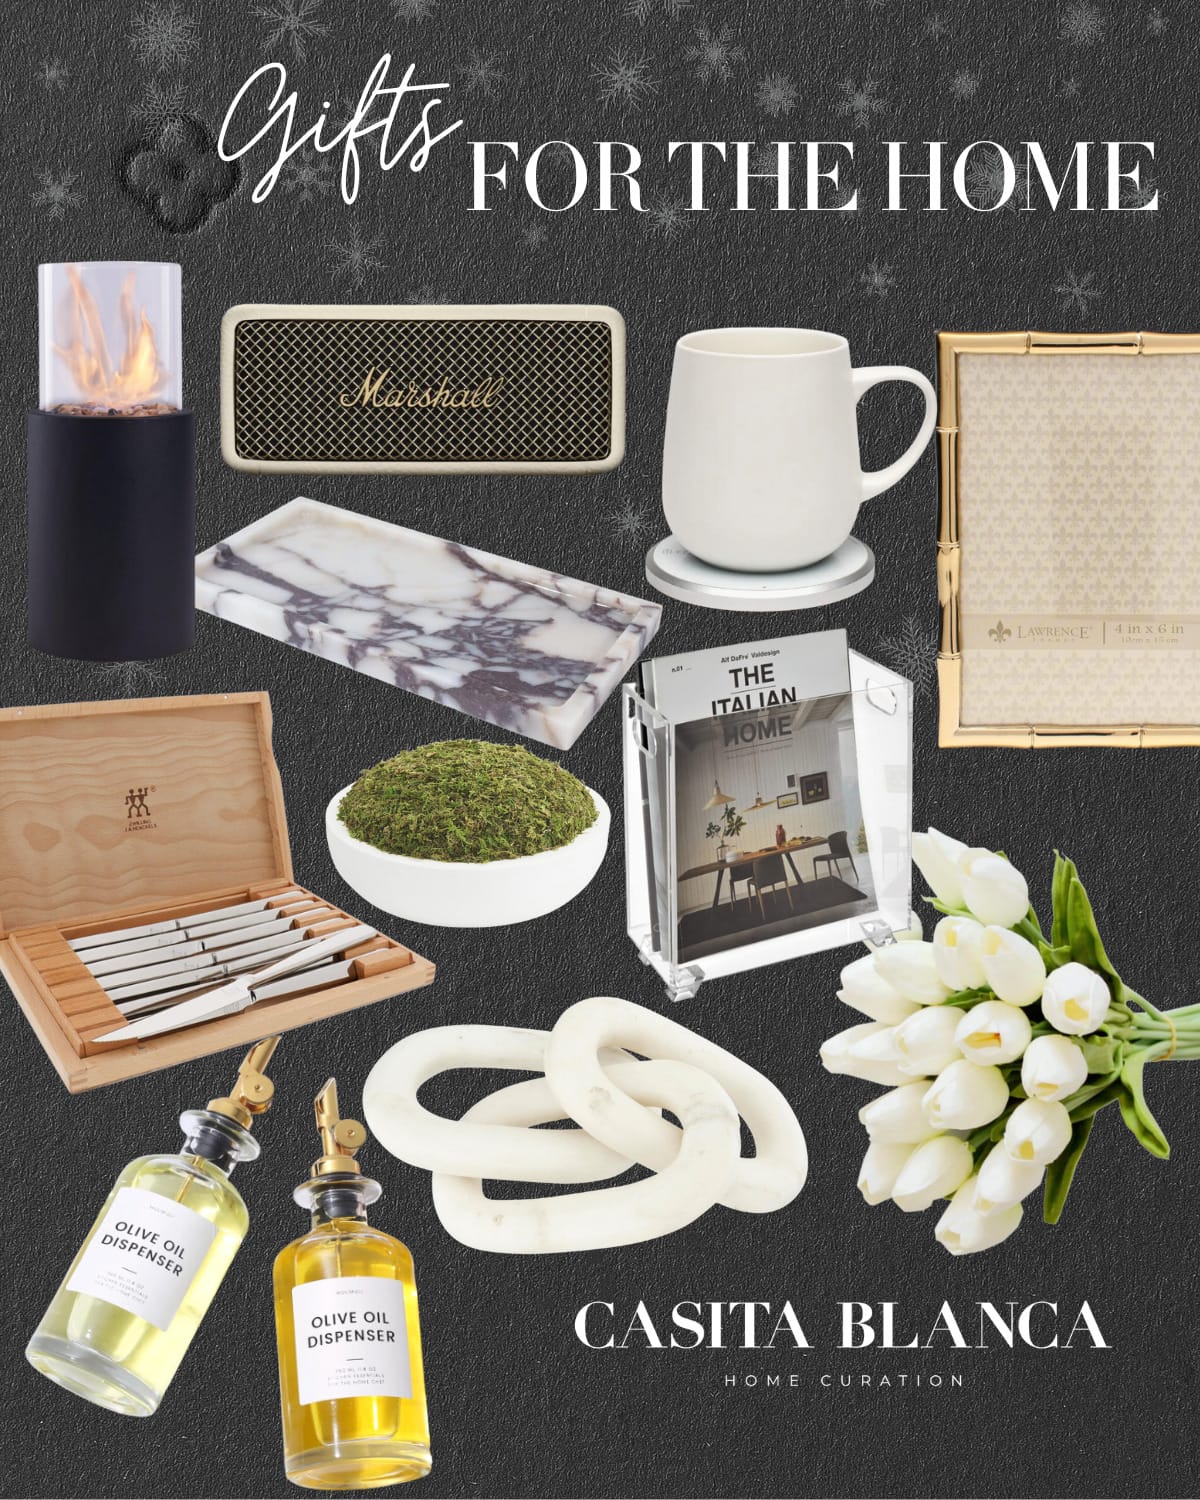 10 holiday gift guides everyone will love | #holiday #giftguide #christmas #giftideas #giftsforthehome #homedecor #holidayhouse #home #knives #marble #floral #speaker